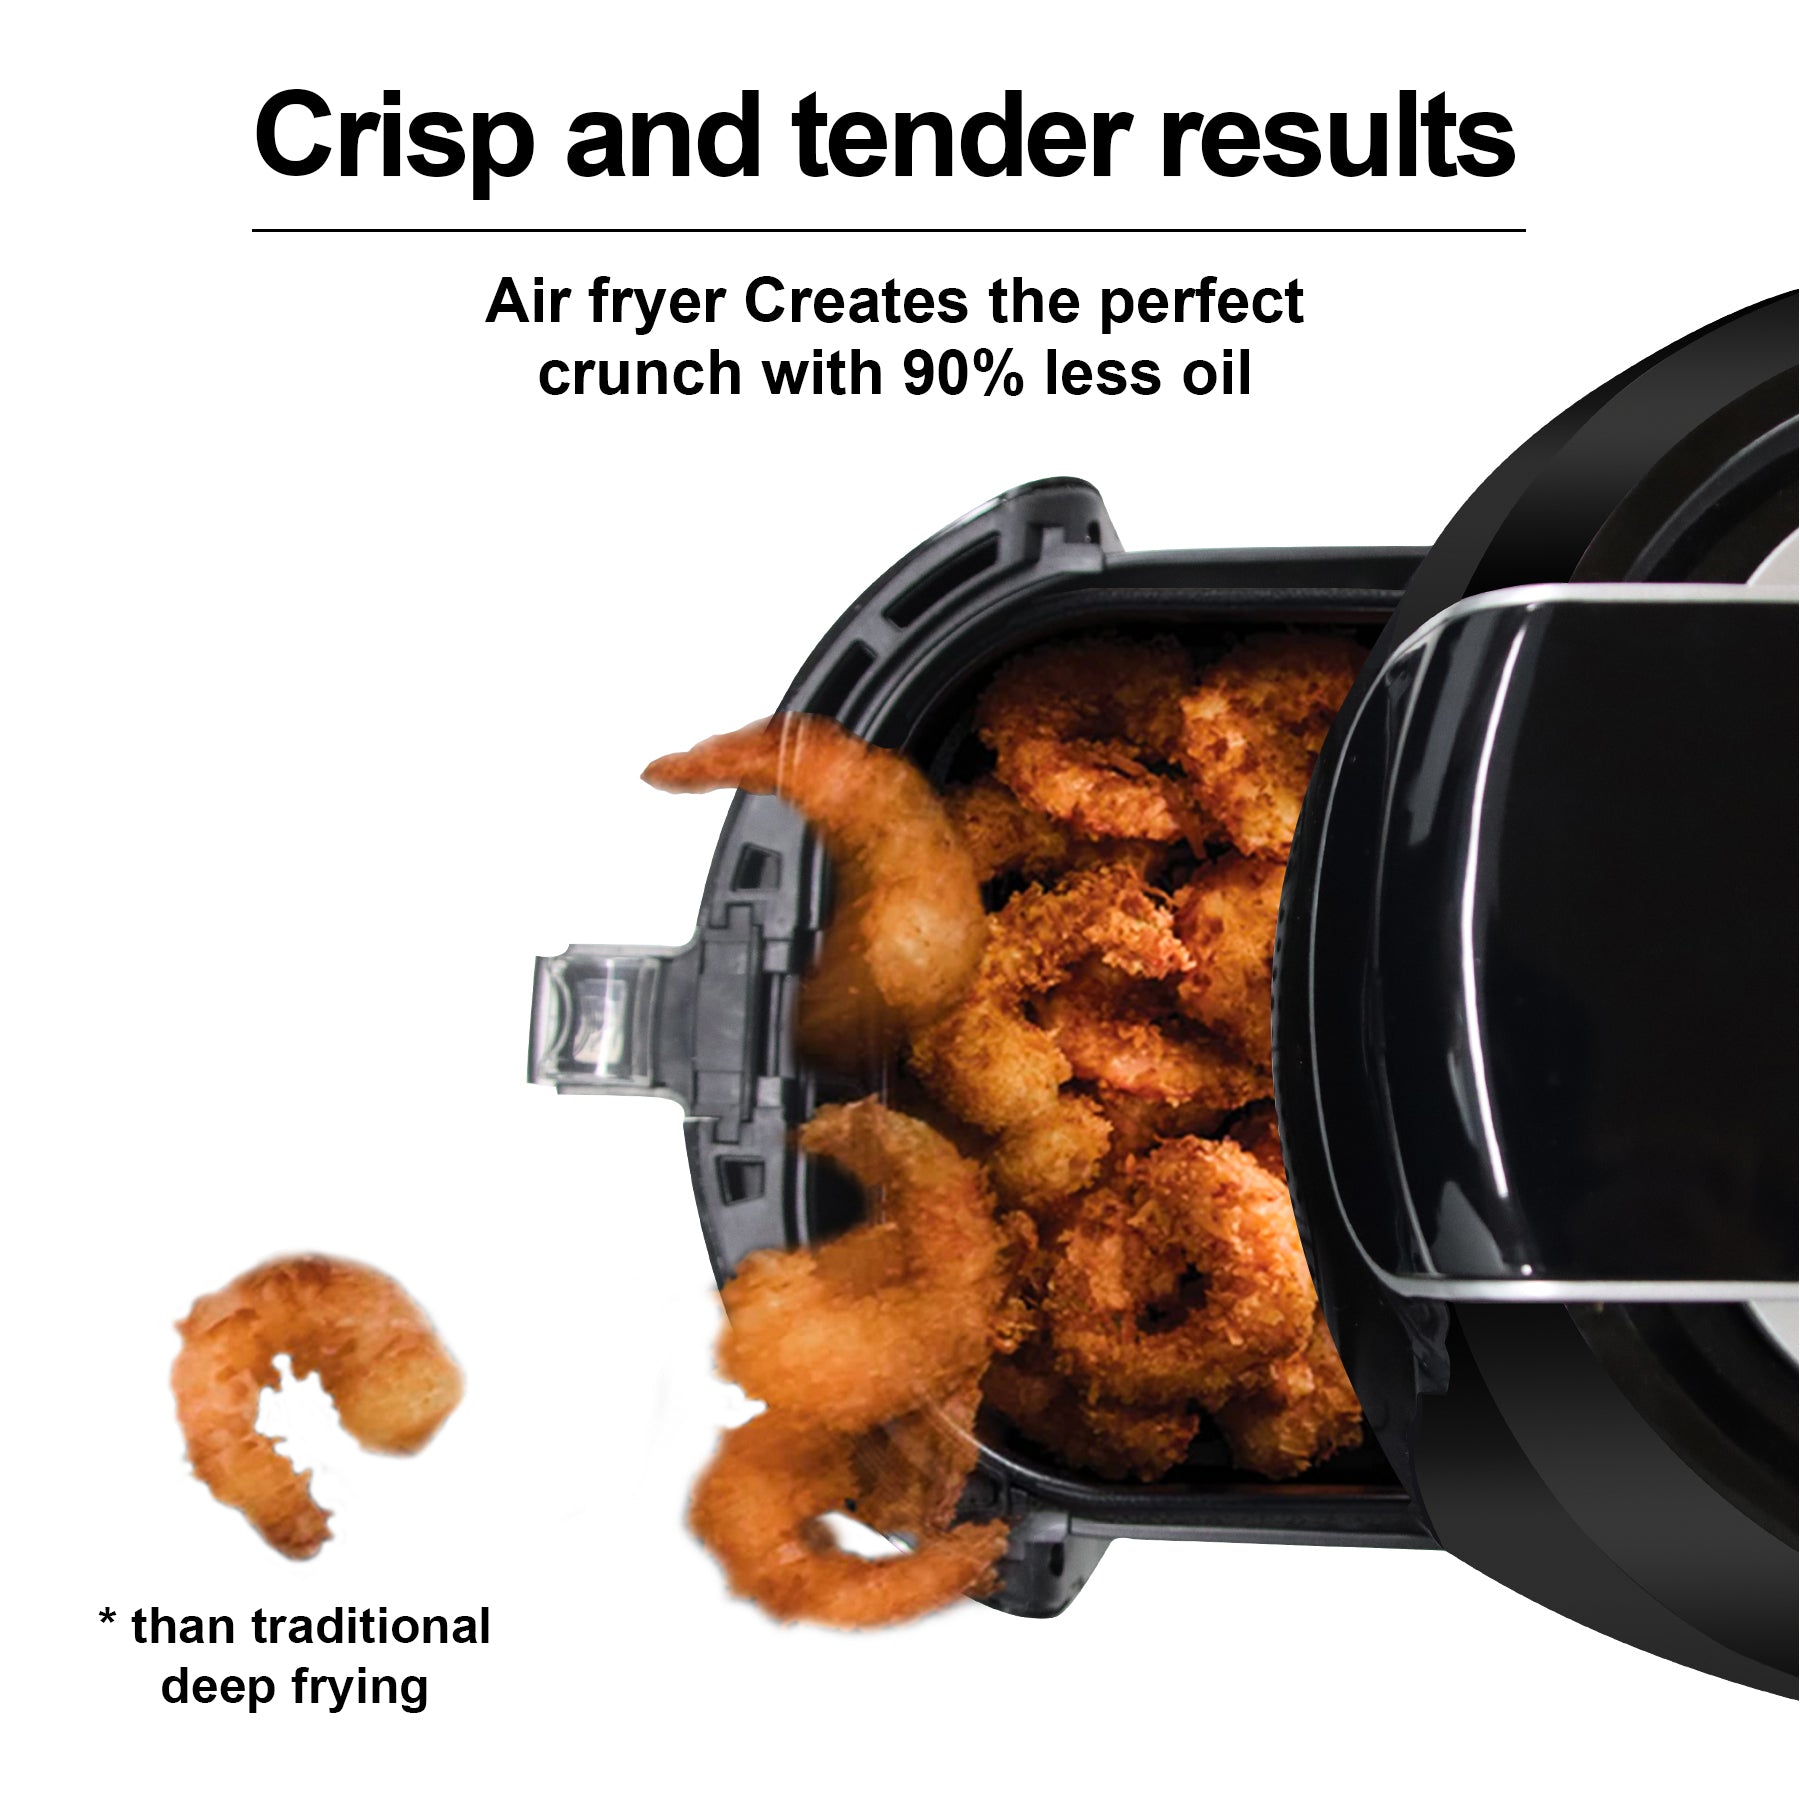 Air Fryer Creates the perfect crunch with 90% less oil